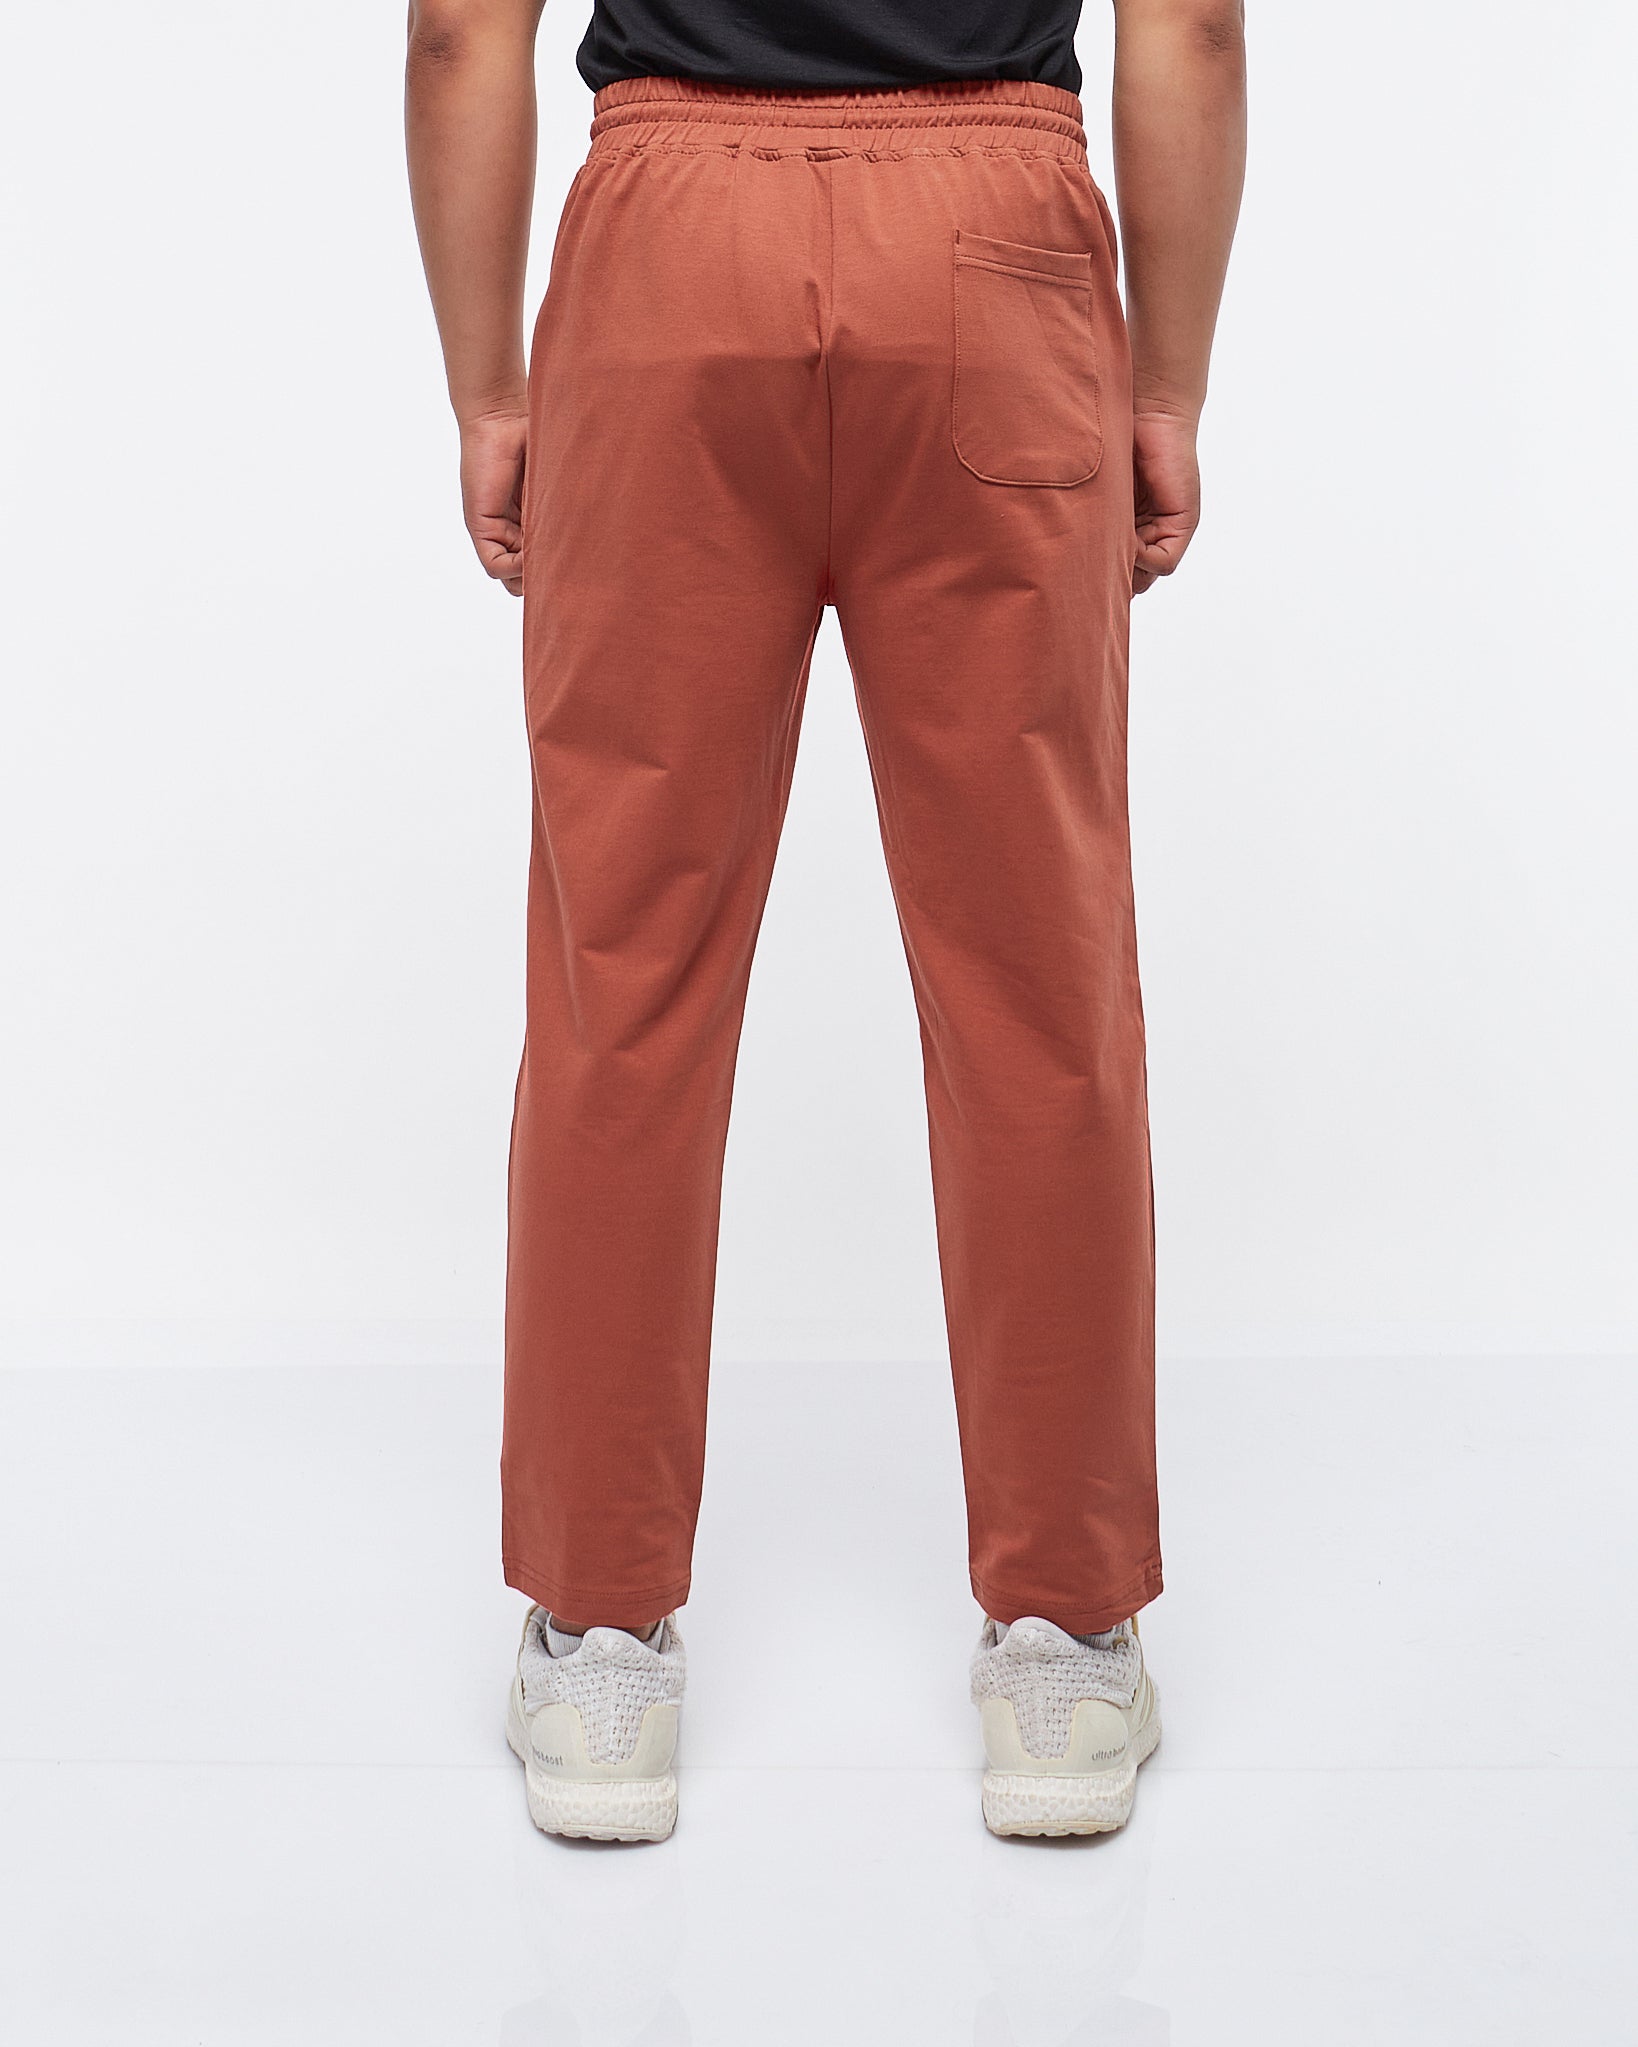 MOI OUTFIT-Logo Embroidered Men Track Pants 17.90